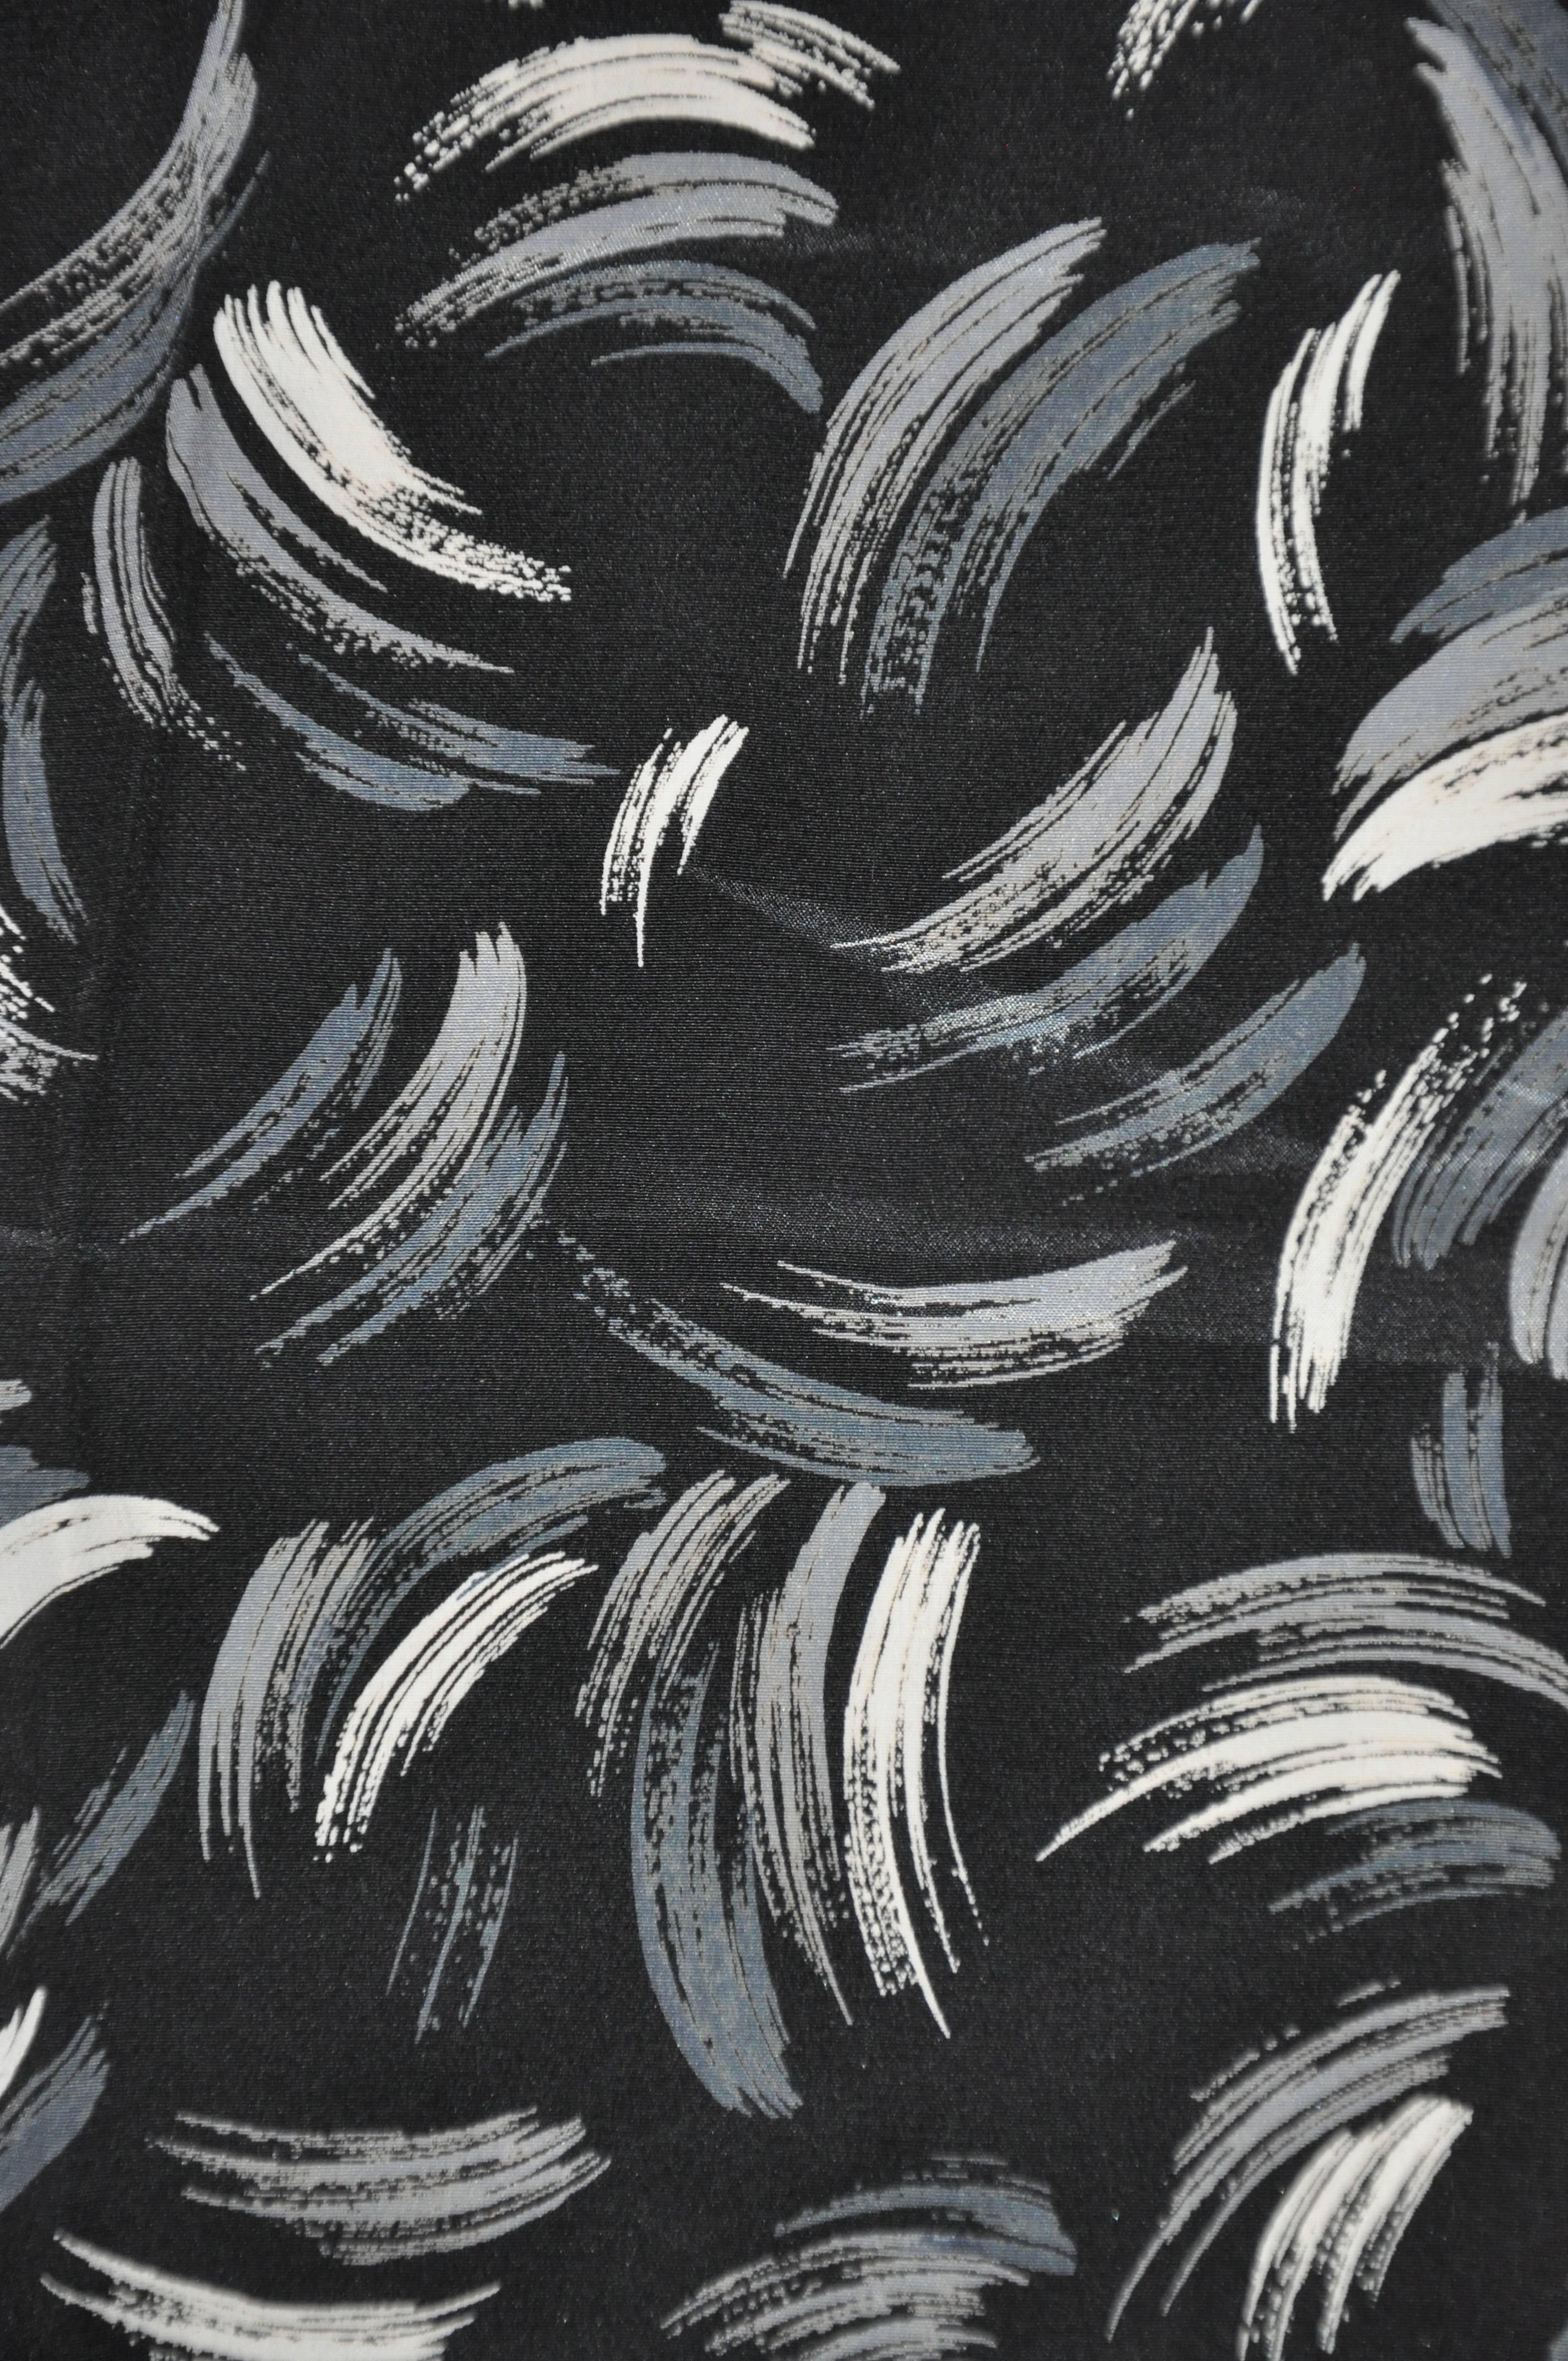 Black & white "brush strokes" men's silk handkerchief measures 12" x 12 1/2", finished with hand-rolled edges. Made in Italy.